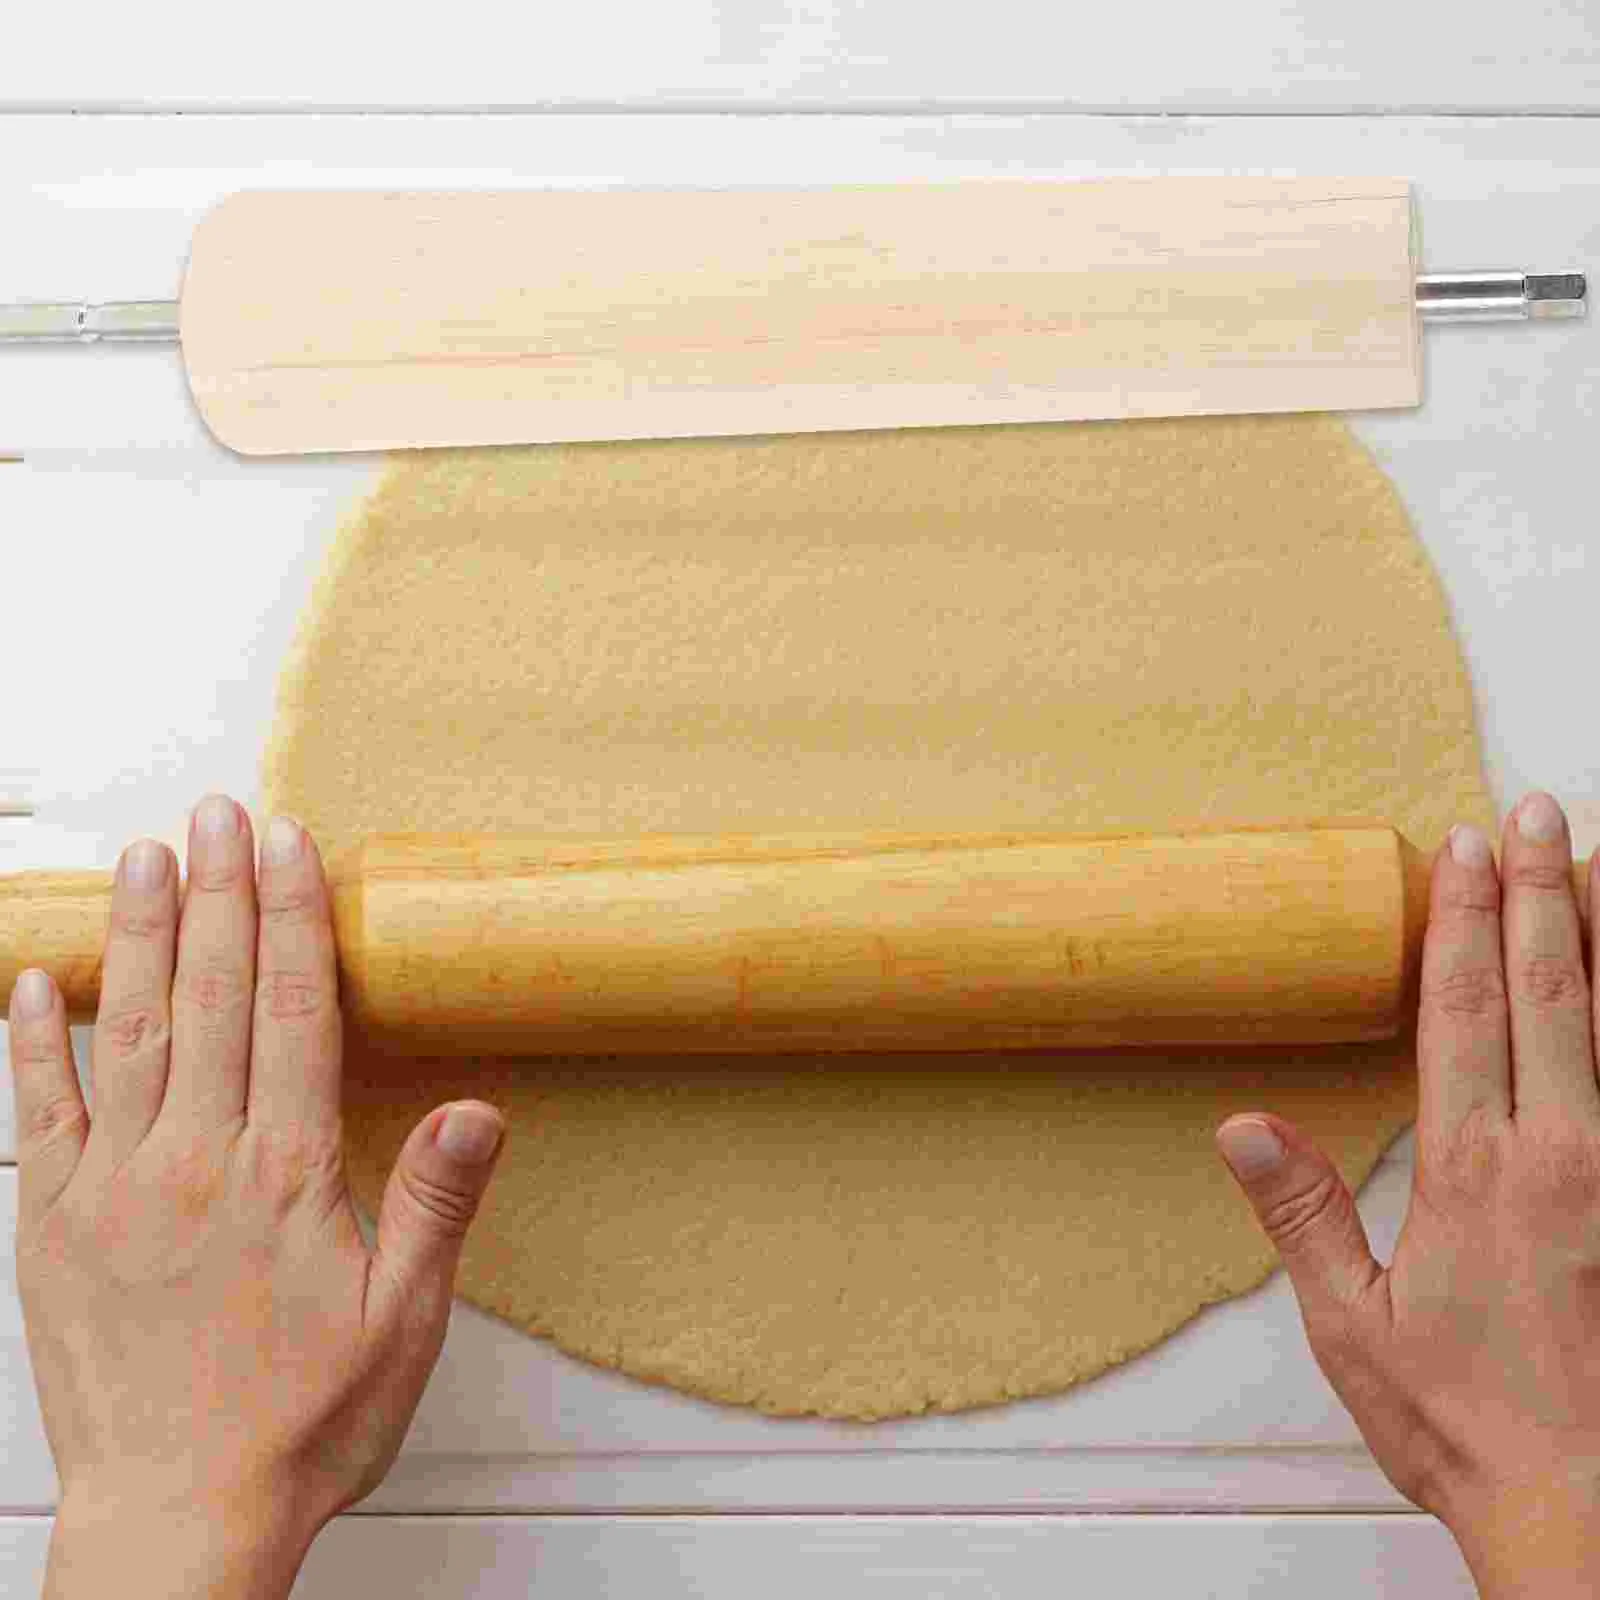 

DIY Chimney Cake Mold Wooden Stick Baking Part Bakery Bread Non-stick Accessory